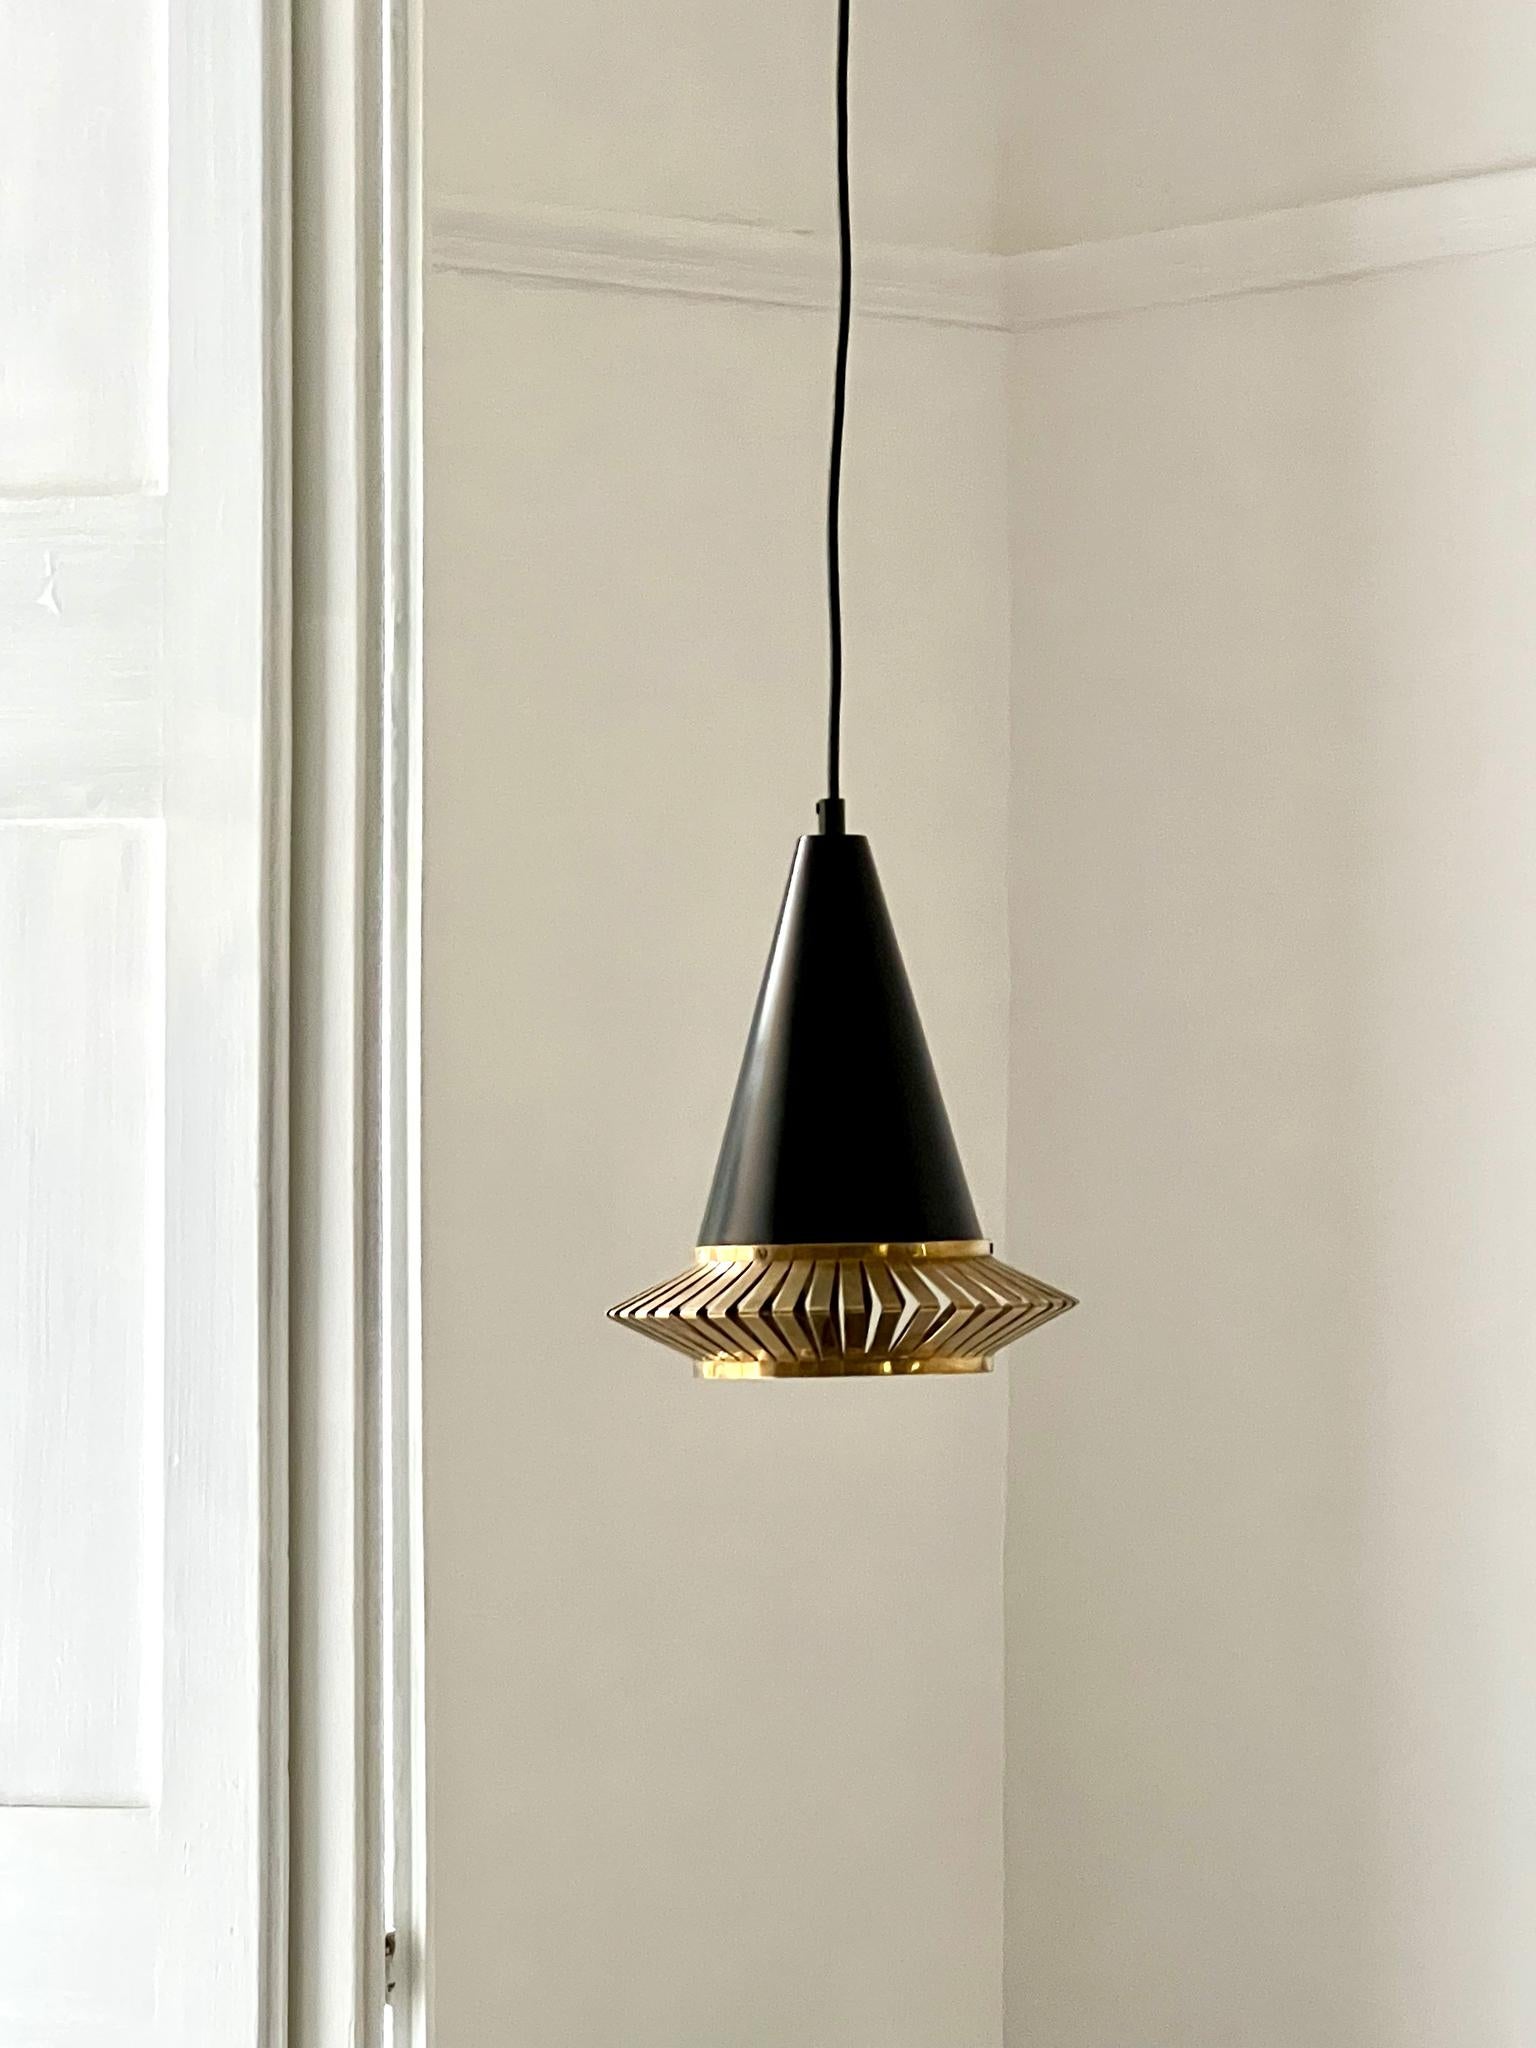 A mid-20th century pendant light by Maria Lindeman for Idman of Finland. The light is illustrated in the Idman catalogue and is model number K 2-1 (small size).

Overall the piece is in good vintage condition. The white finish to the inside of the